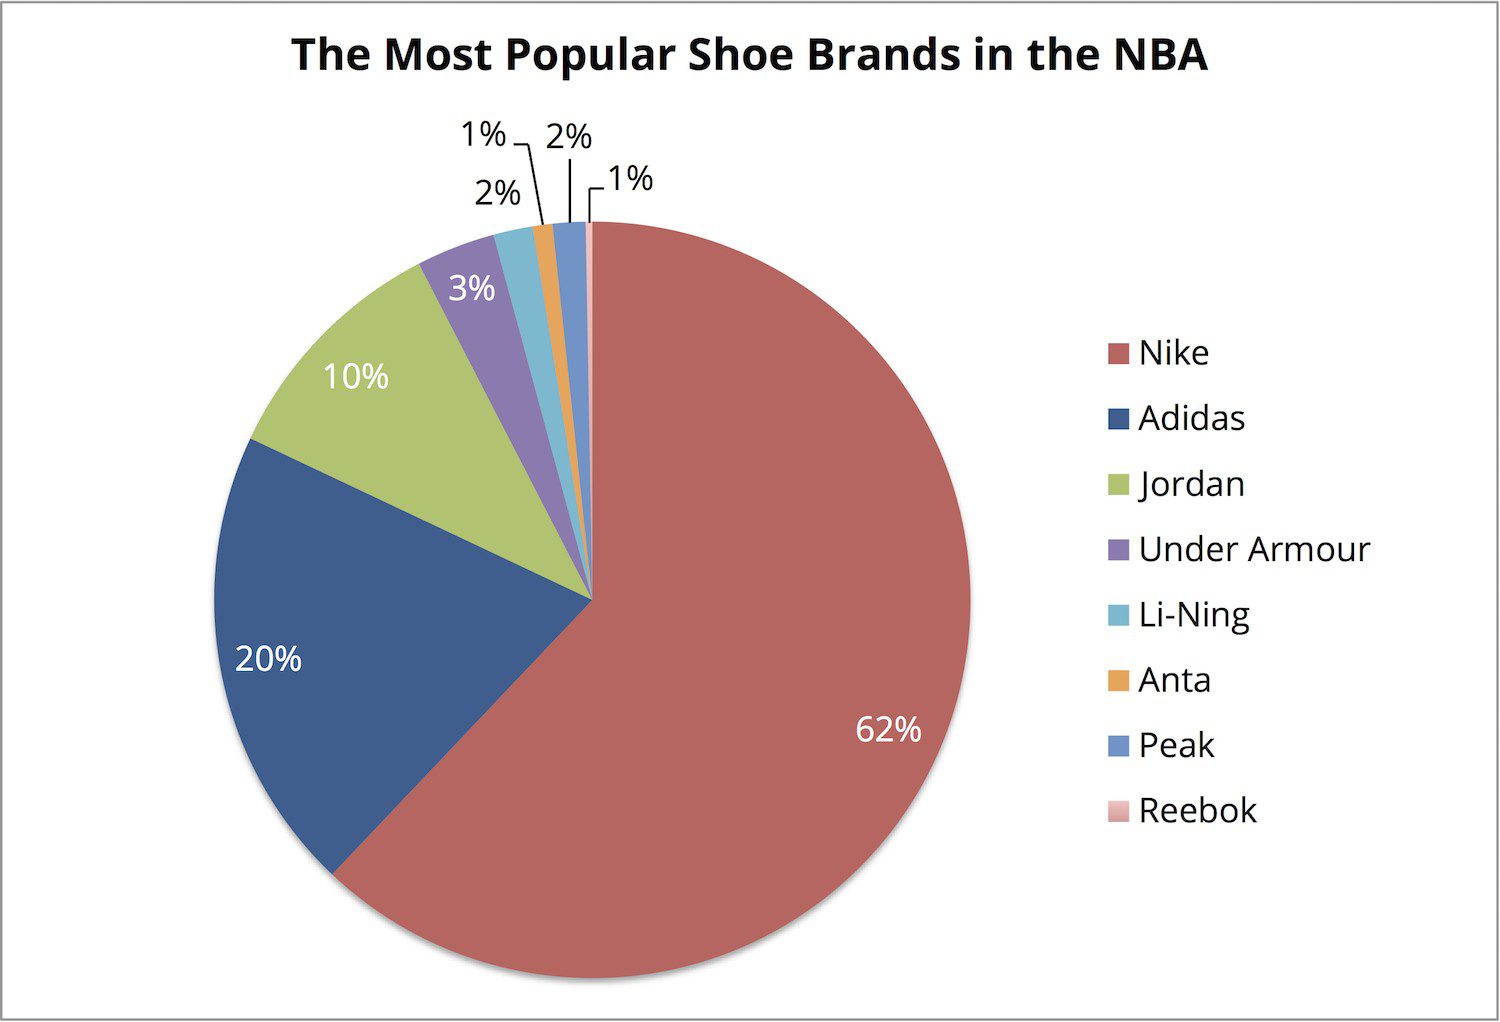 The Most Popular Shoe Brands in the NBA